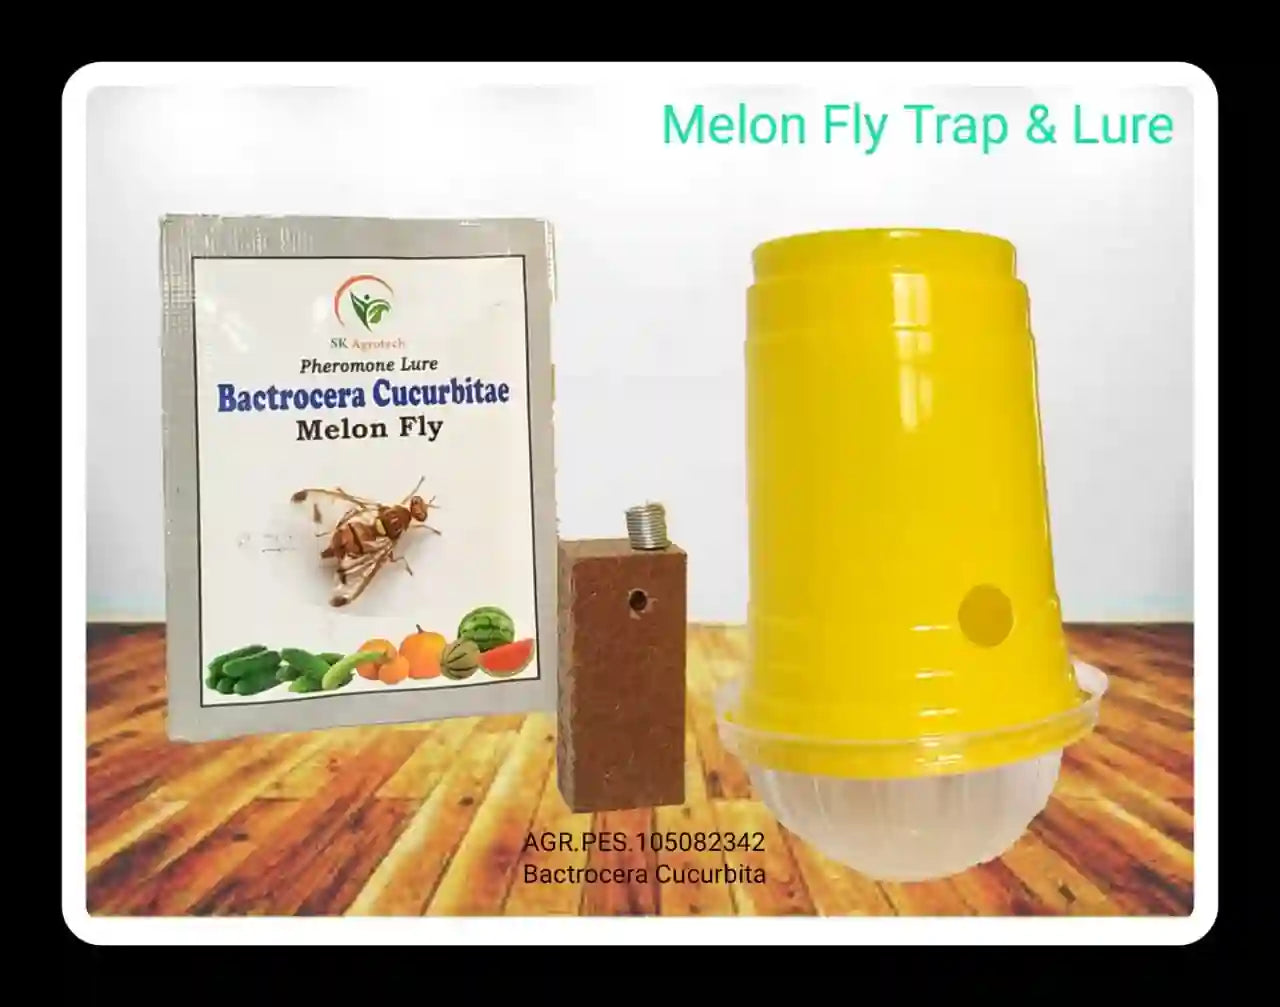 SK Agrotech Pheromone Eco Trap with Melon Fly Lure - Krushidukan_1